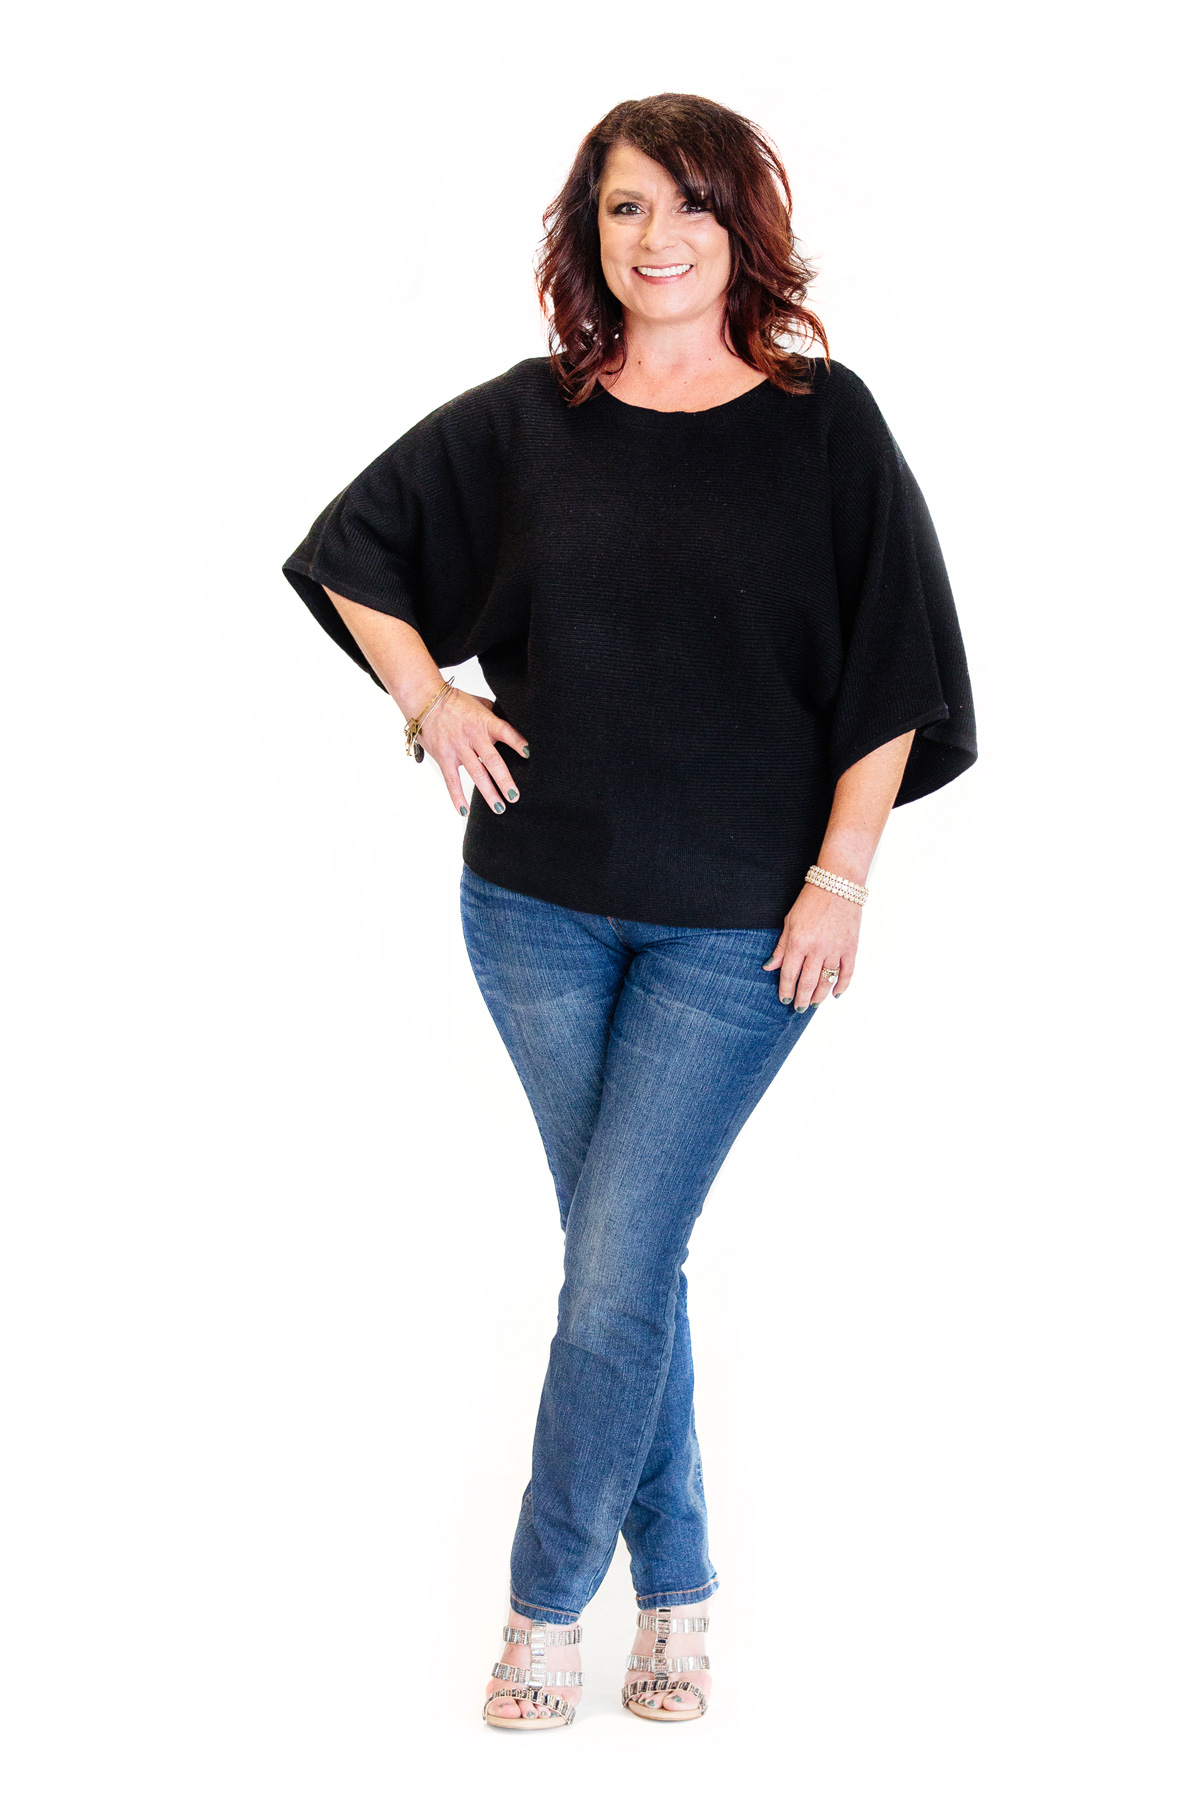 B105 radio personality Chelsie, wearing a black top and jeans, for her blogs with Healthspirations.